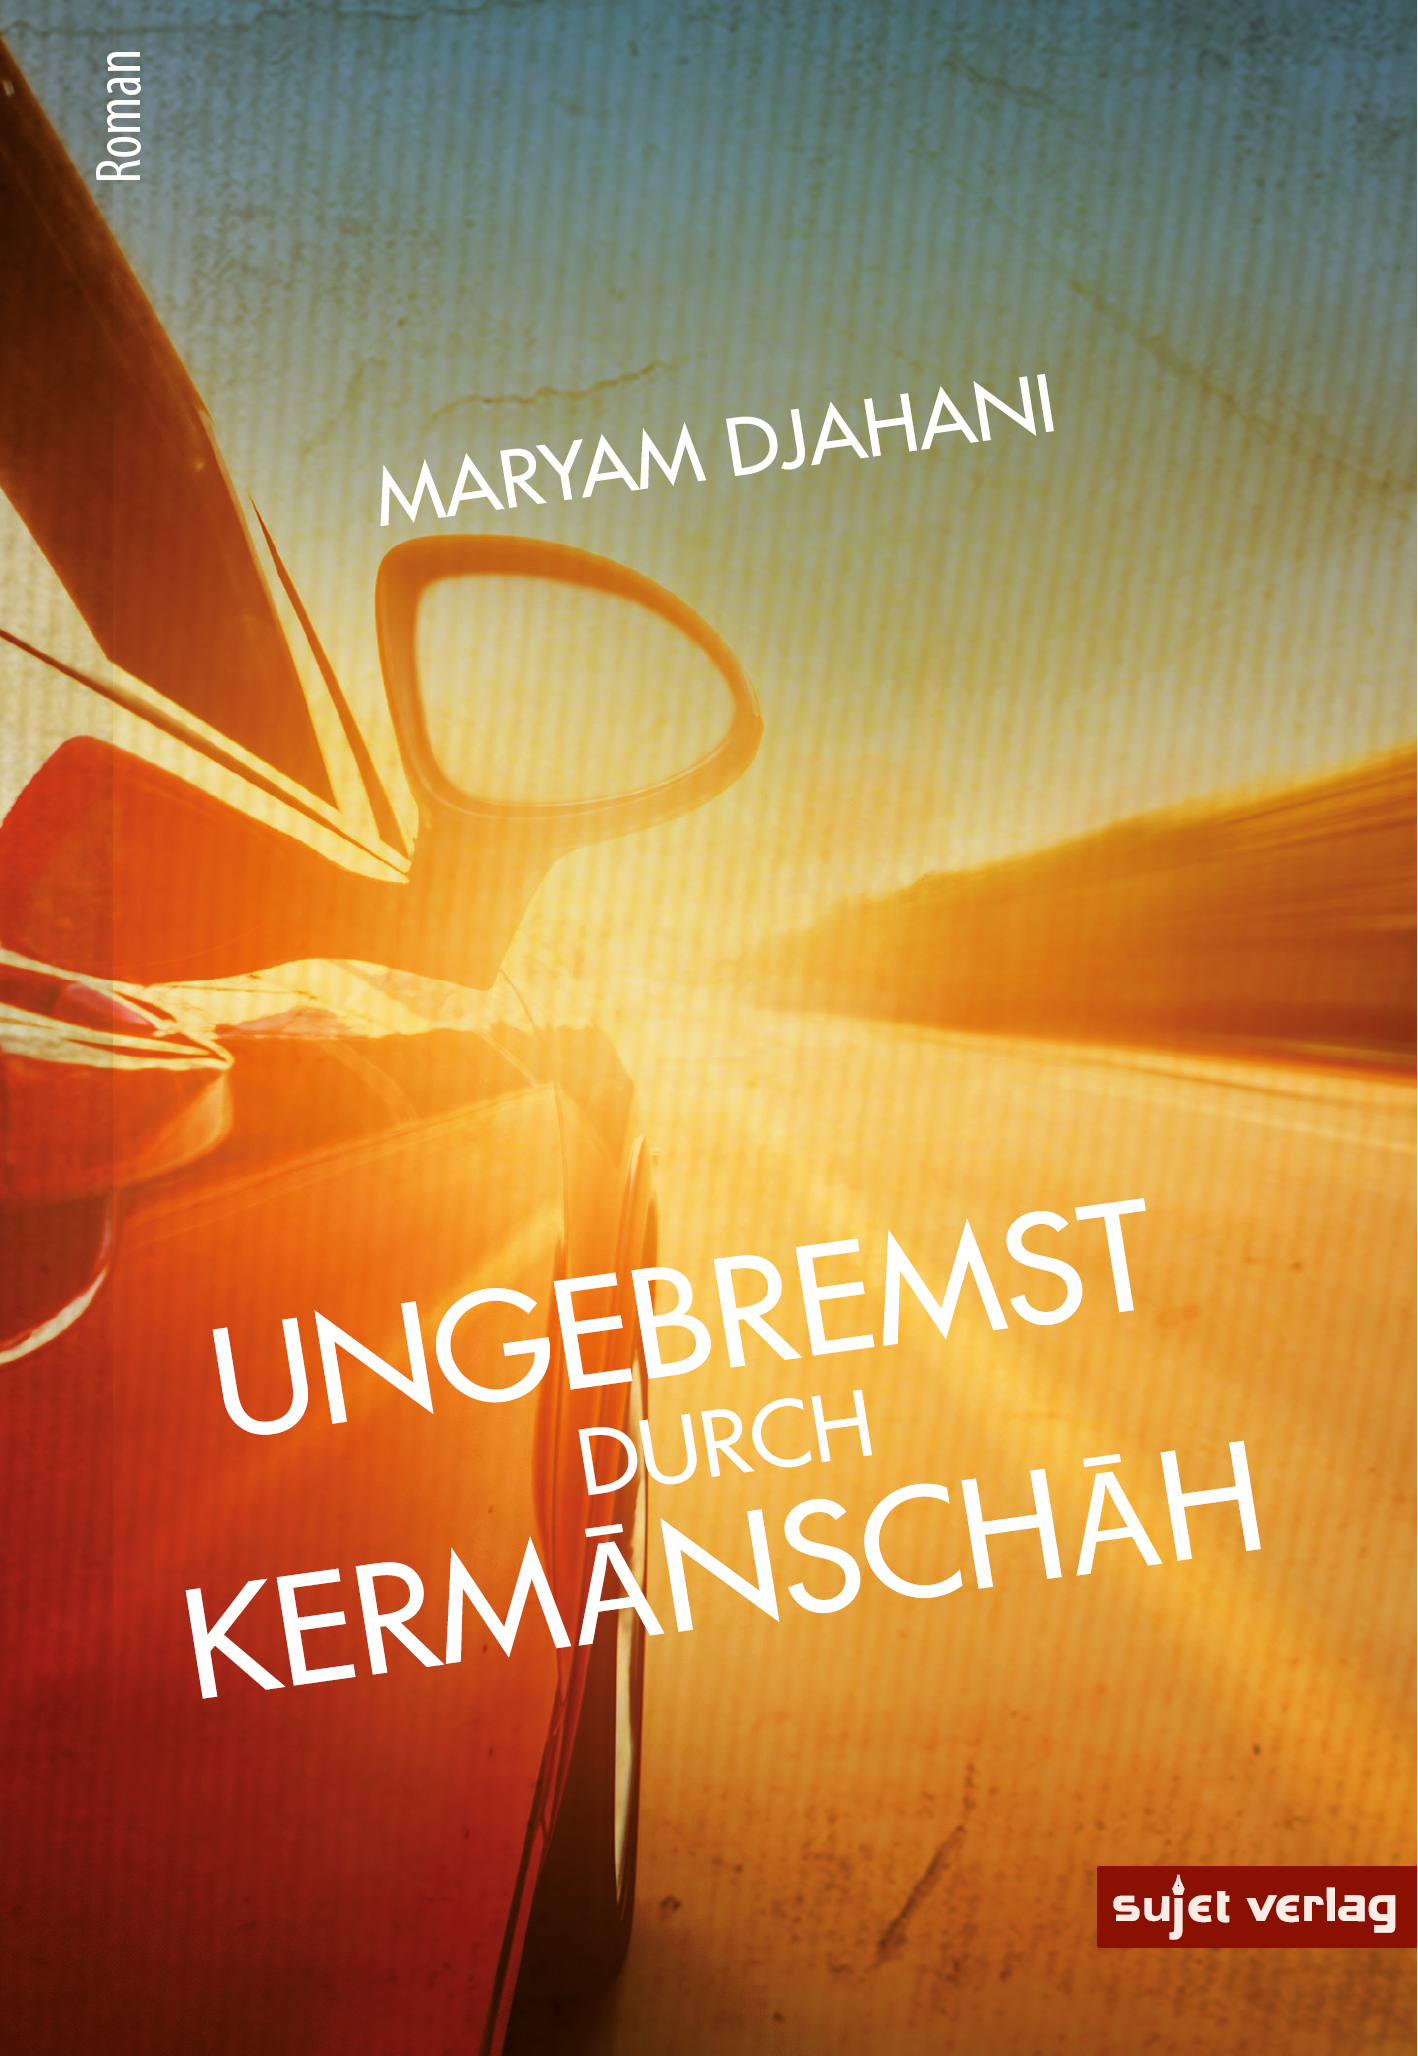 Cover of Maryam Djahani's "Ungebremst durch Kermanschah", translated into German by Isabel Stuempel (published by Sujet)